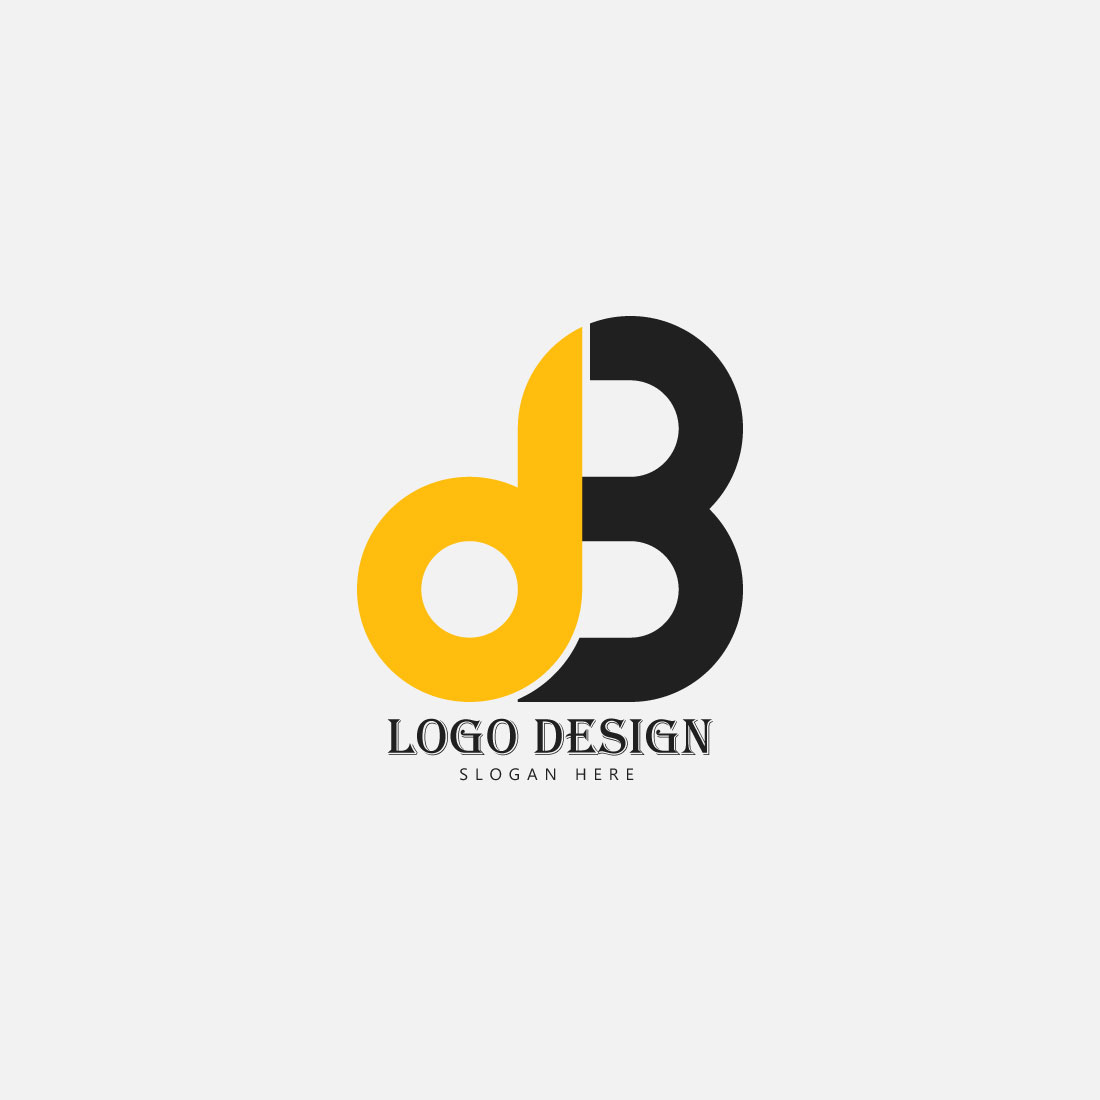 BD B D Letter Modern Logo Design with Yellow Background and Swoosh. Stock  Vector - Illustration of symbol, vector: 92320884